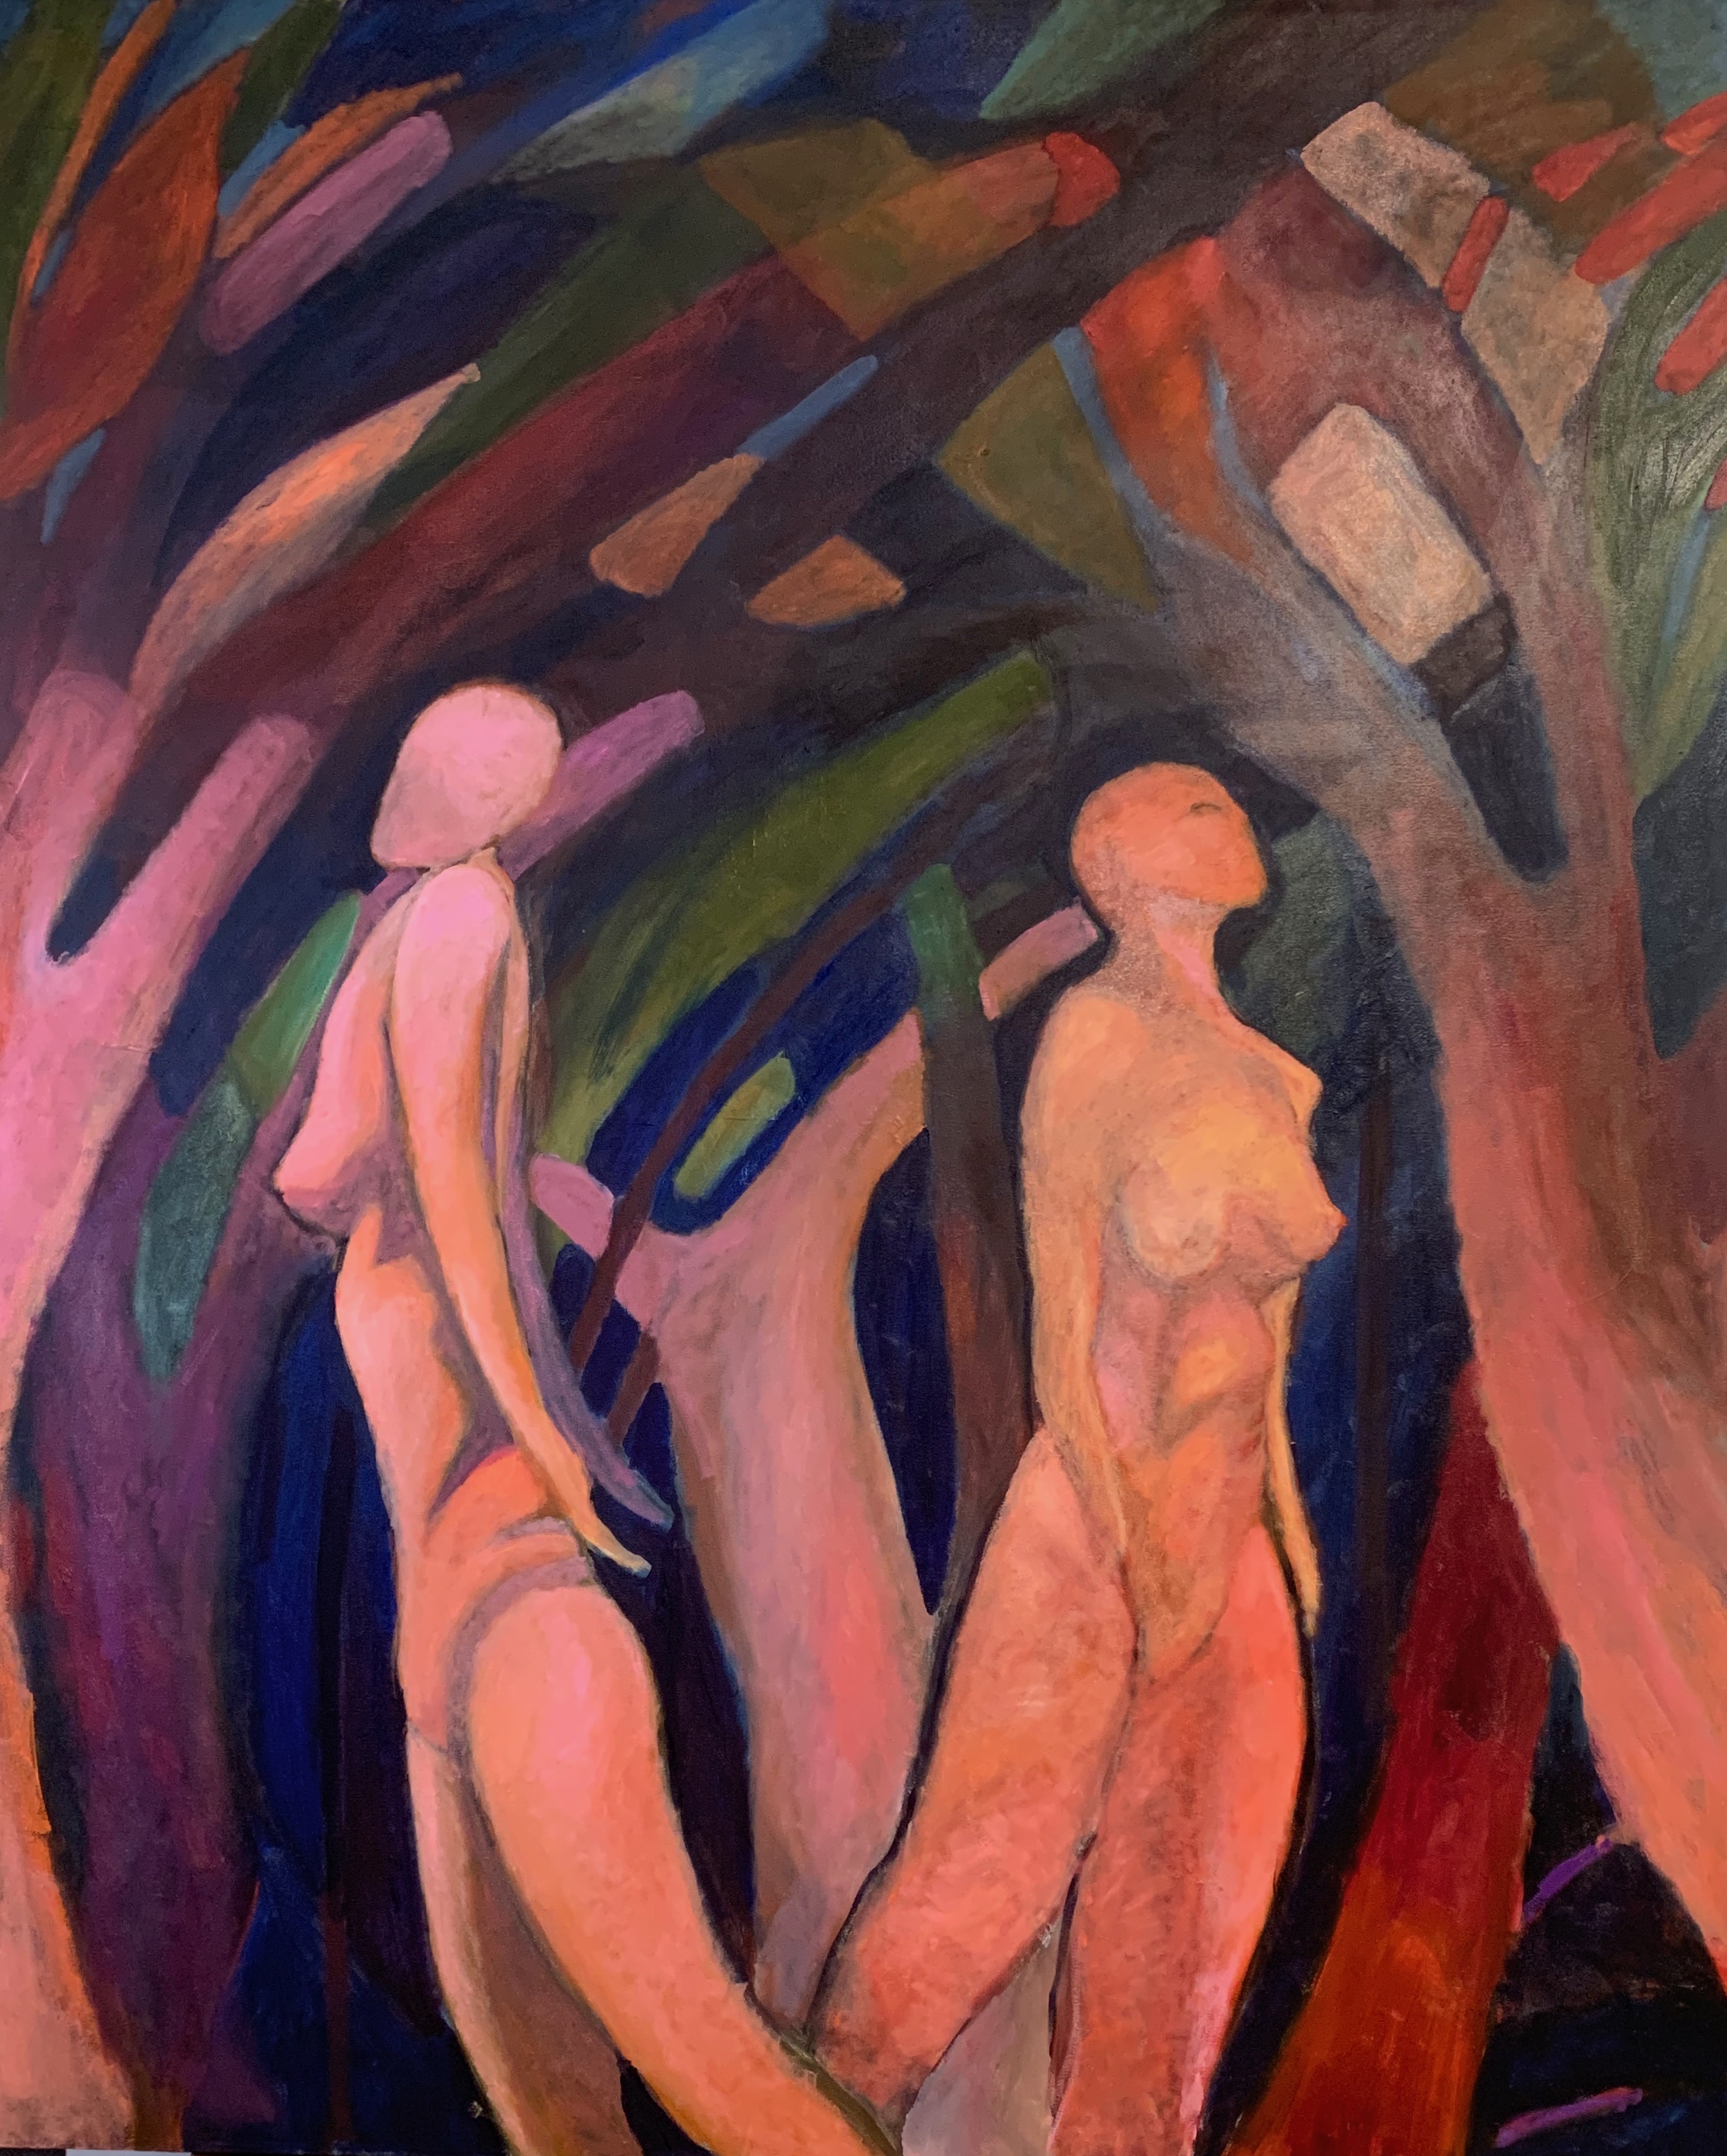 Two Sisters - 70" x 58" oil on canvas